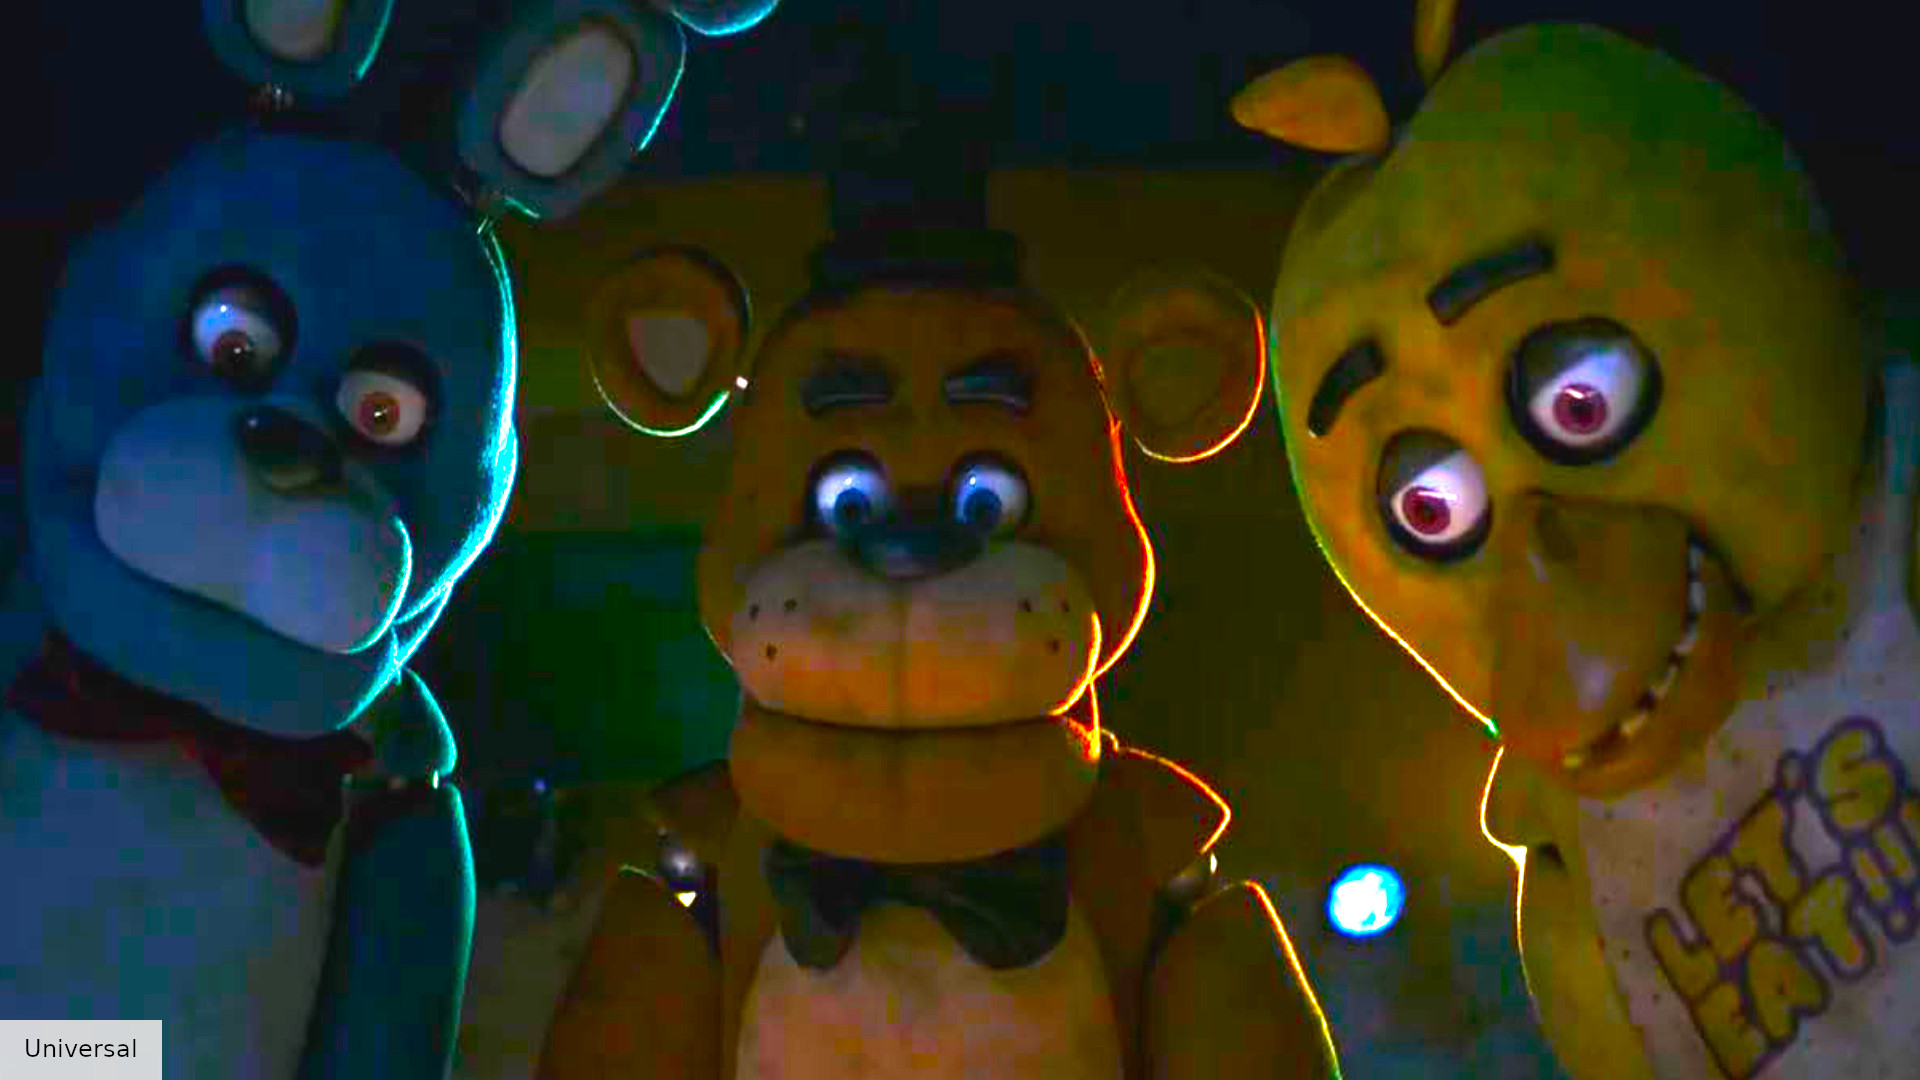 Five Nights at Freddy's Review- Half a Good Film Doesn't Make A